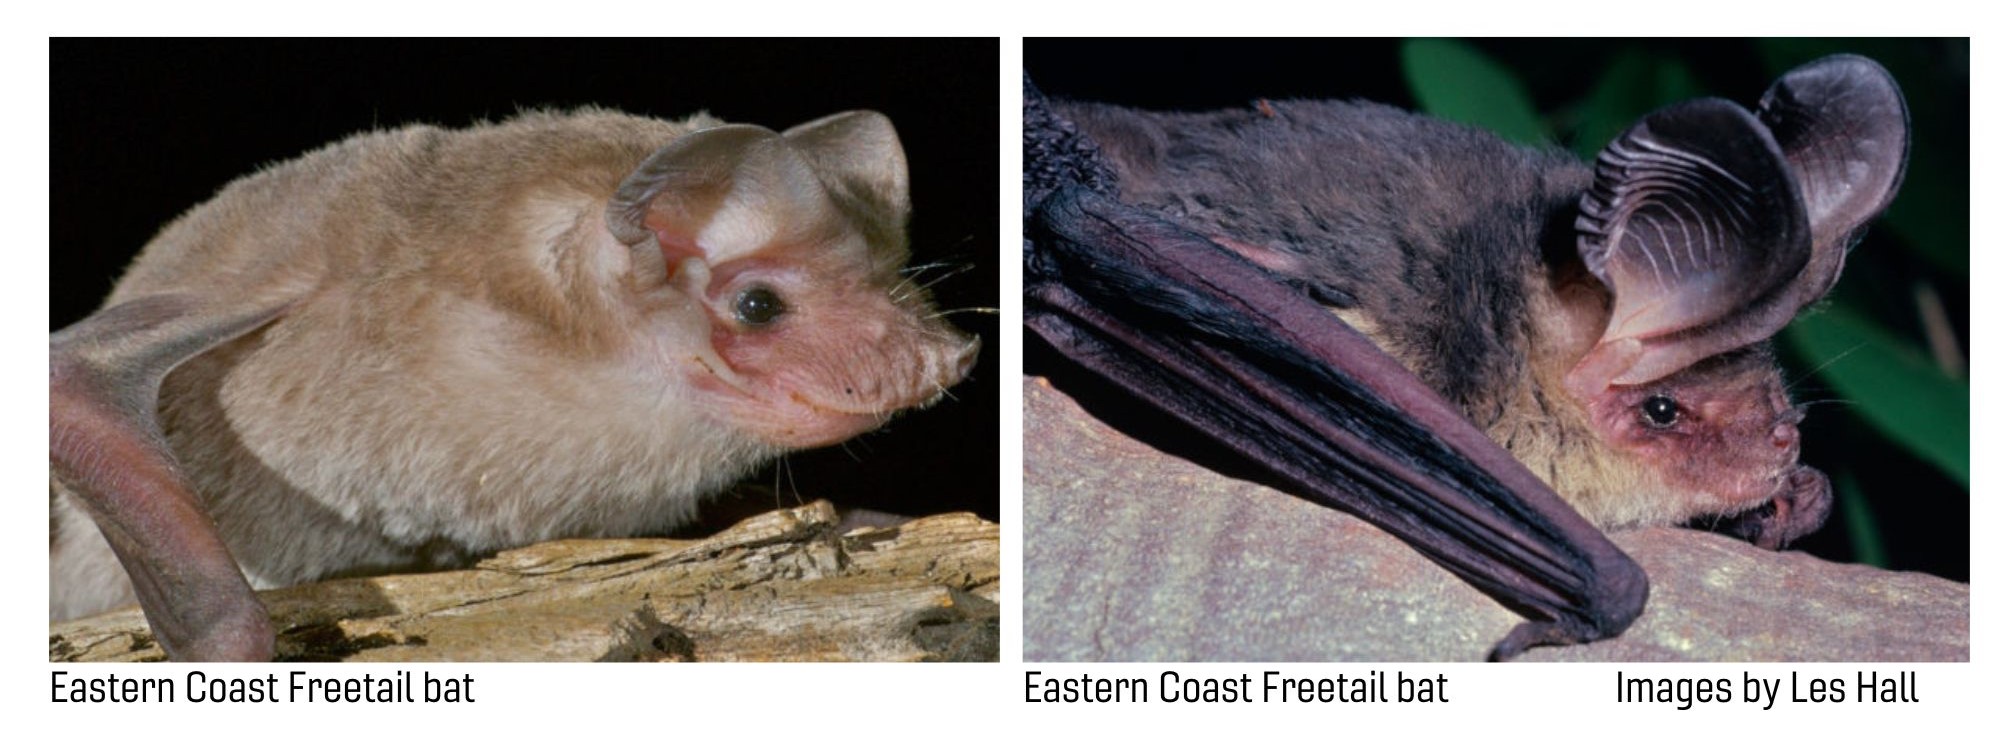 Images of two microbats